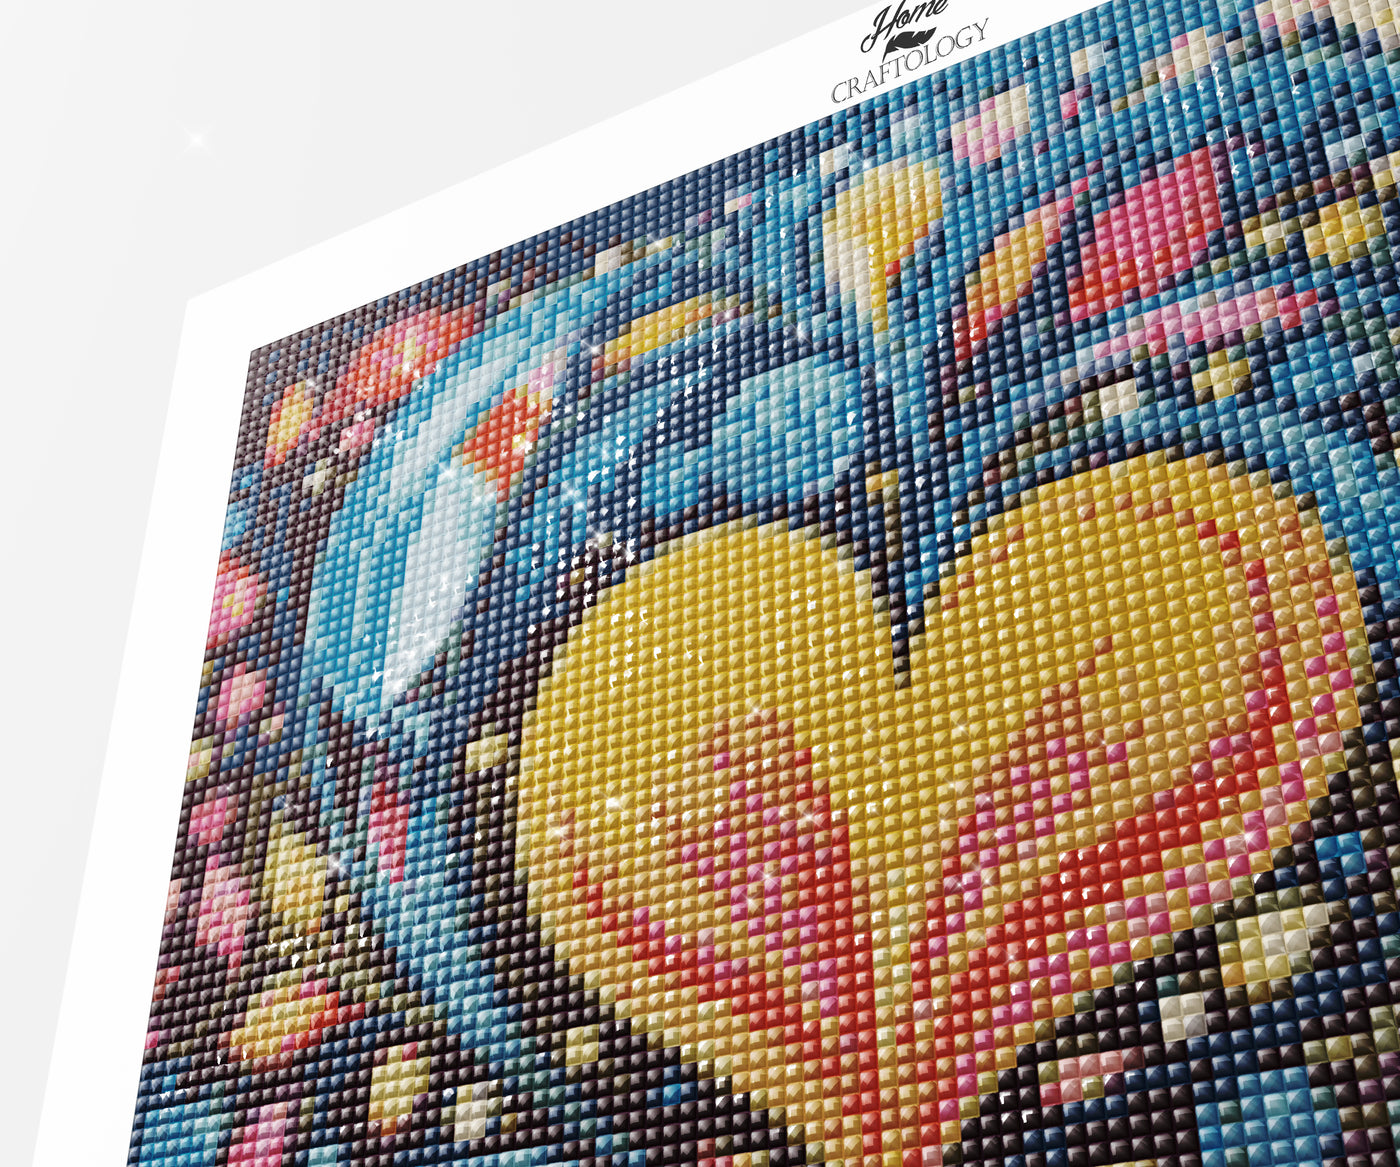 New! Heart and Flower Abstract - Premium Diamond Painting Kit